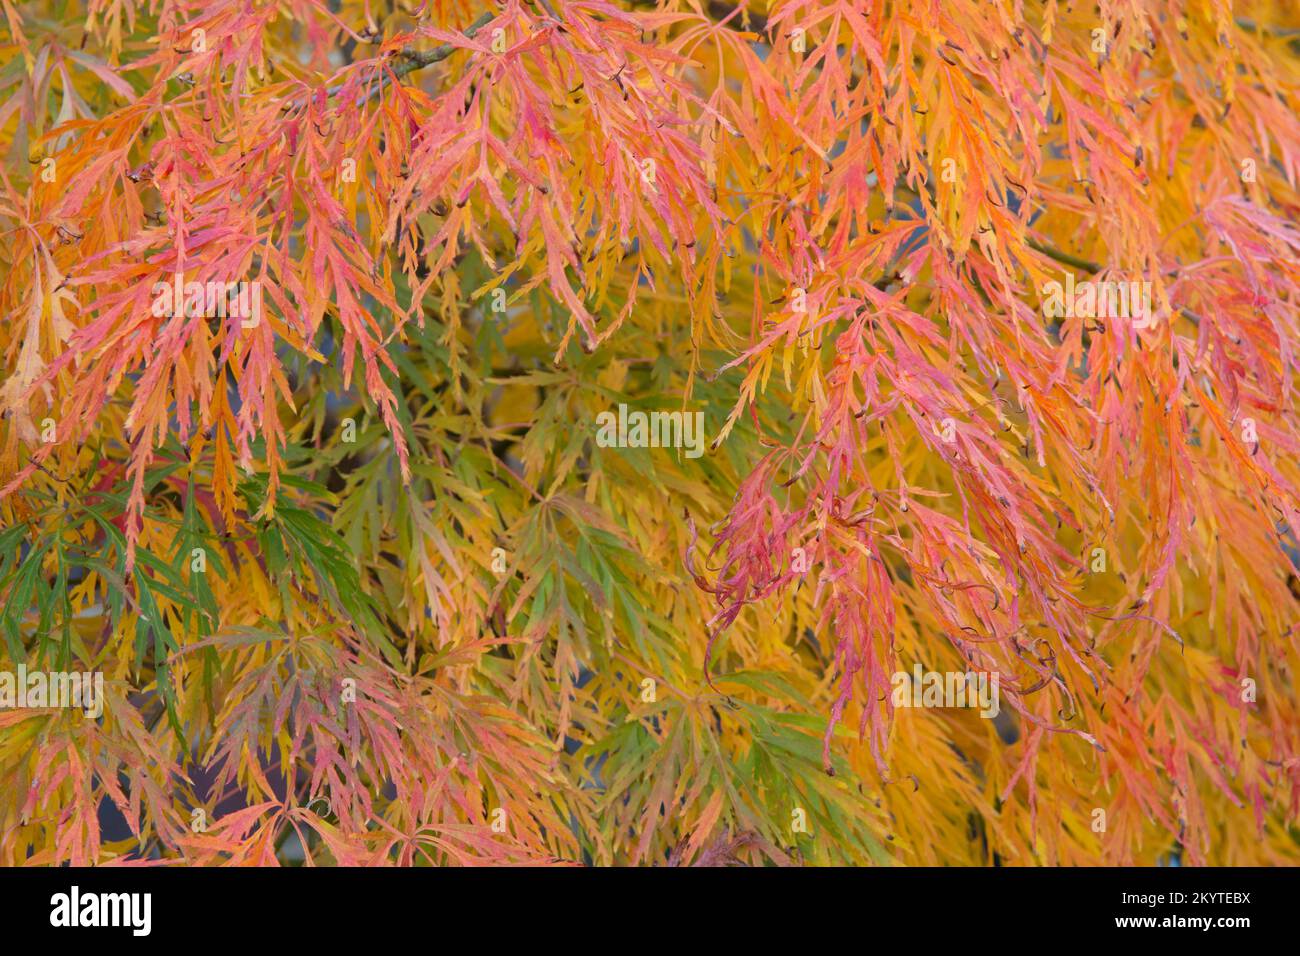 close-up of leaves Acer palmatum var. dissectum 'Viridis' in pot, autumn, fall, UK October, leaves have turned from green to golden yellow and orange. Stock Photo